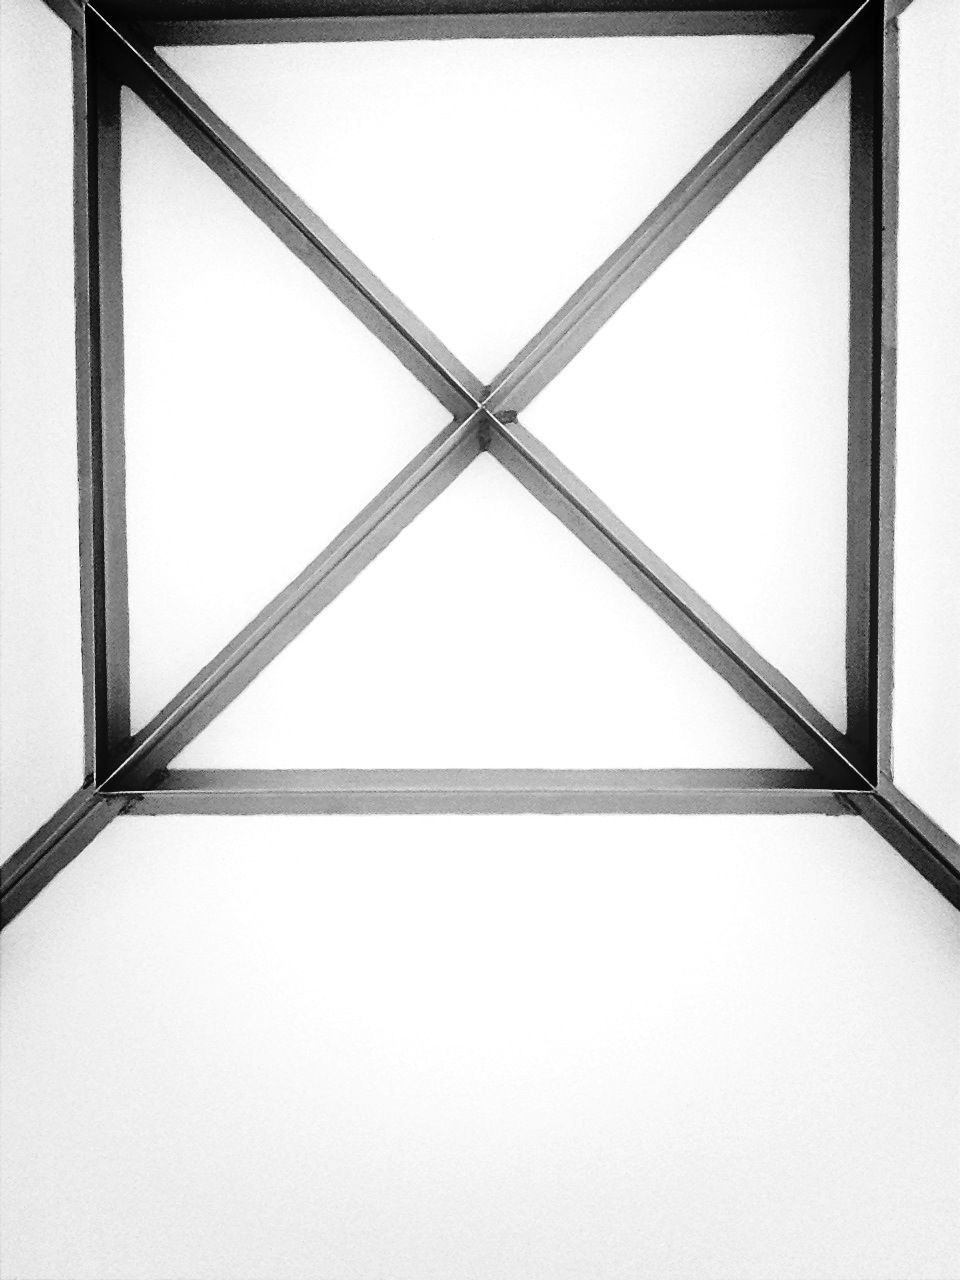 indoors, pattern, low angle view, window, geometric shape, built structure, architecture, full frame, metal, glass - material, backgrounds, directly below, design, copy space, ceiling, no people, close-up, transparent, clear sky, day